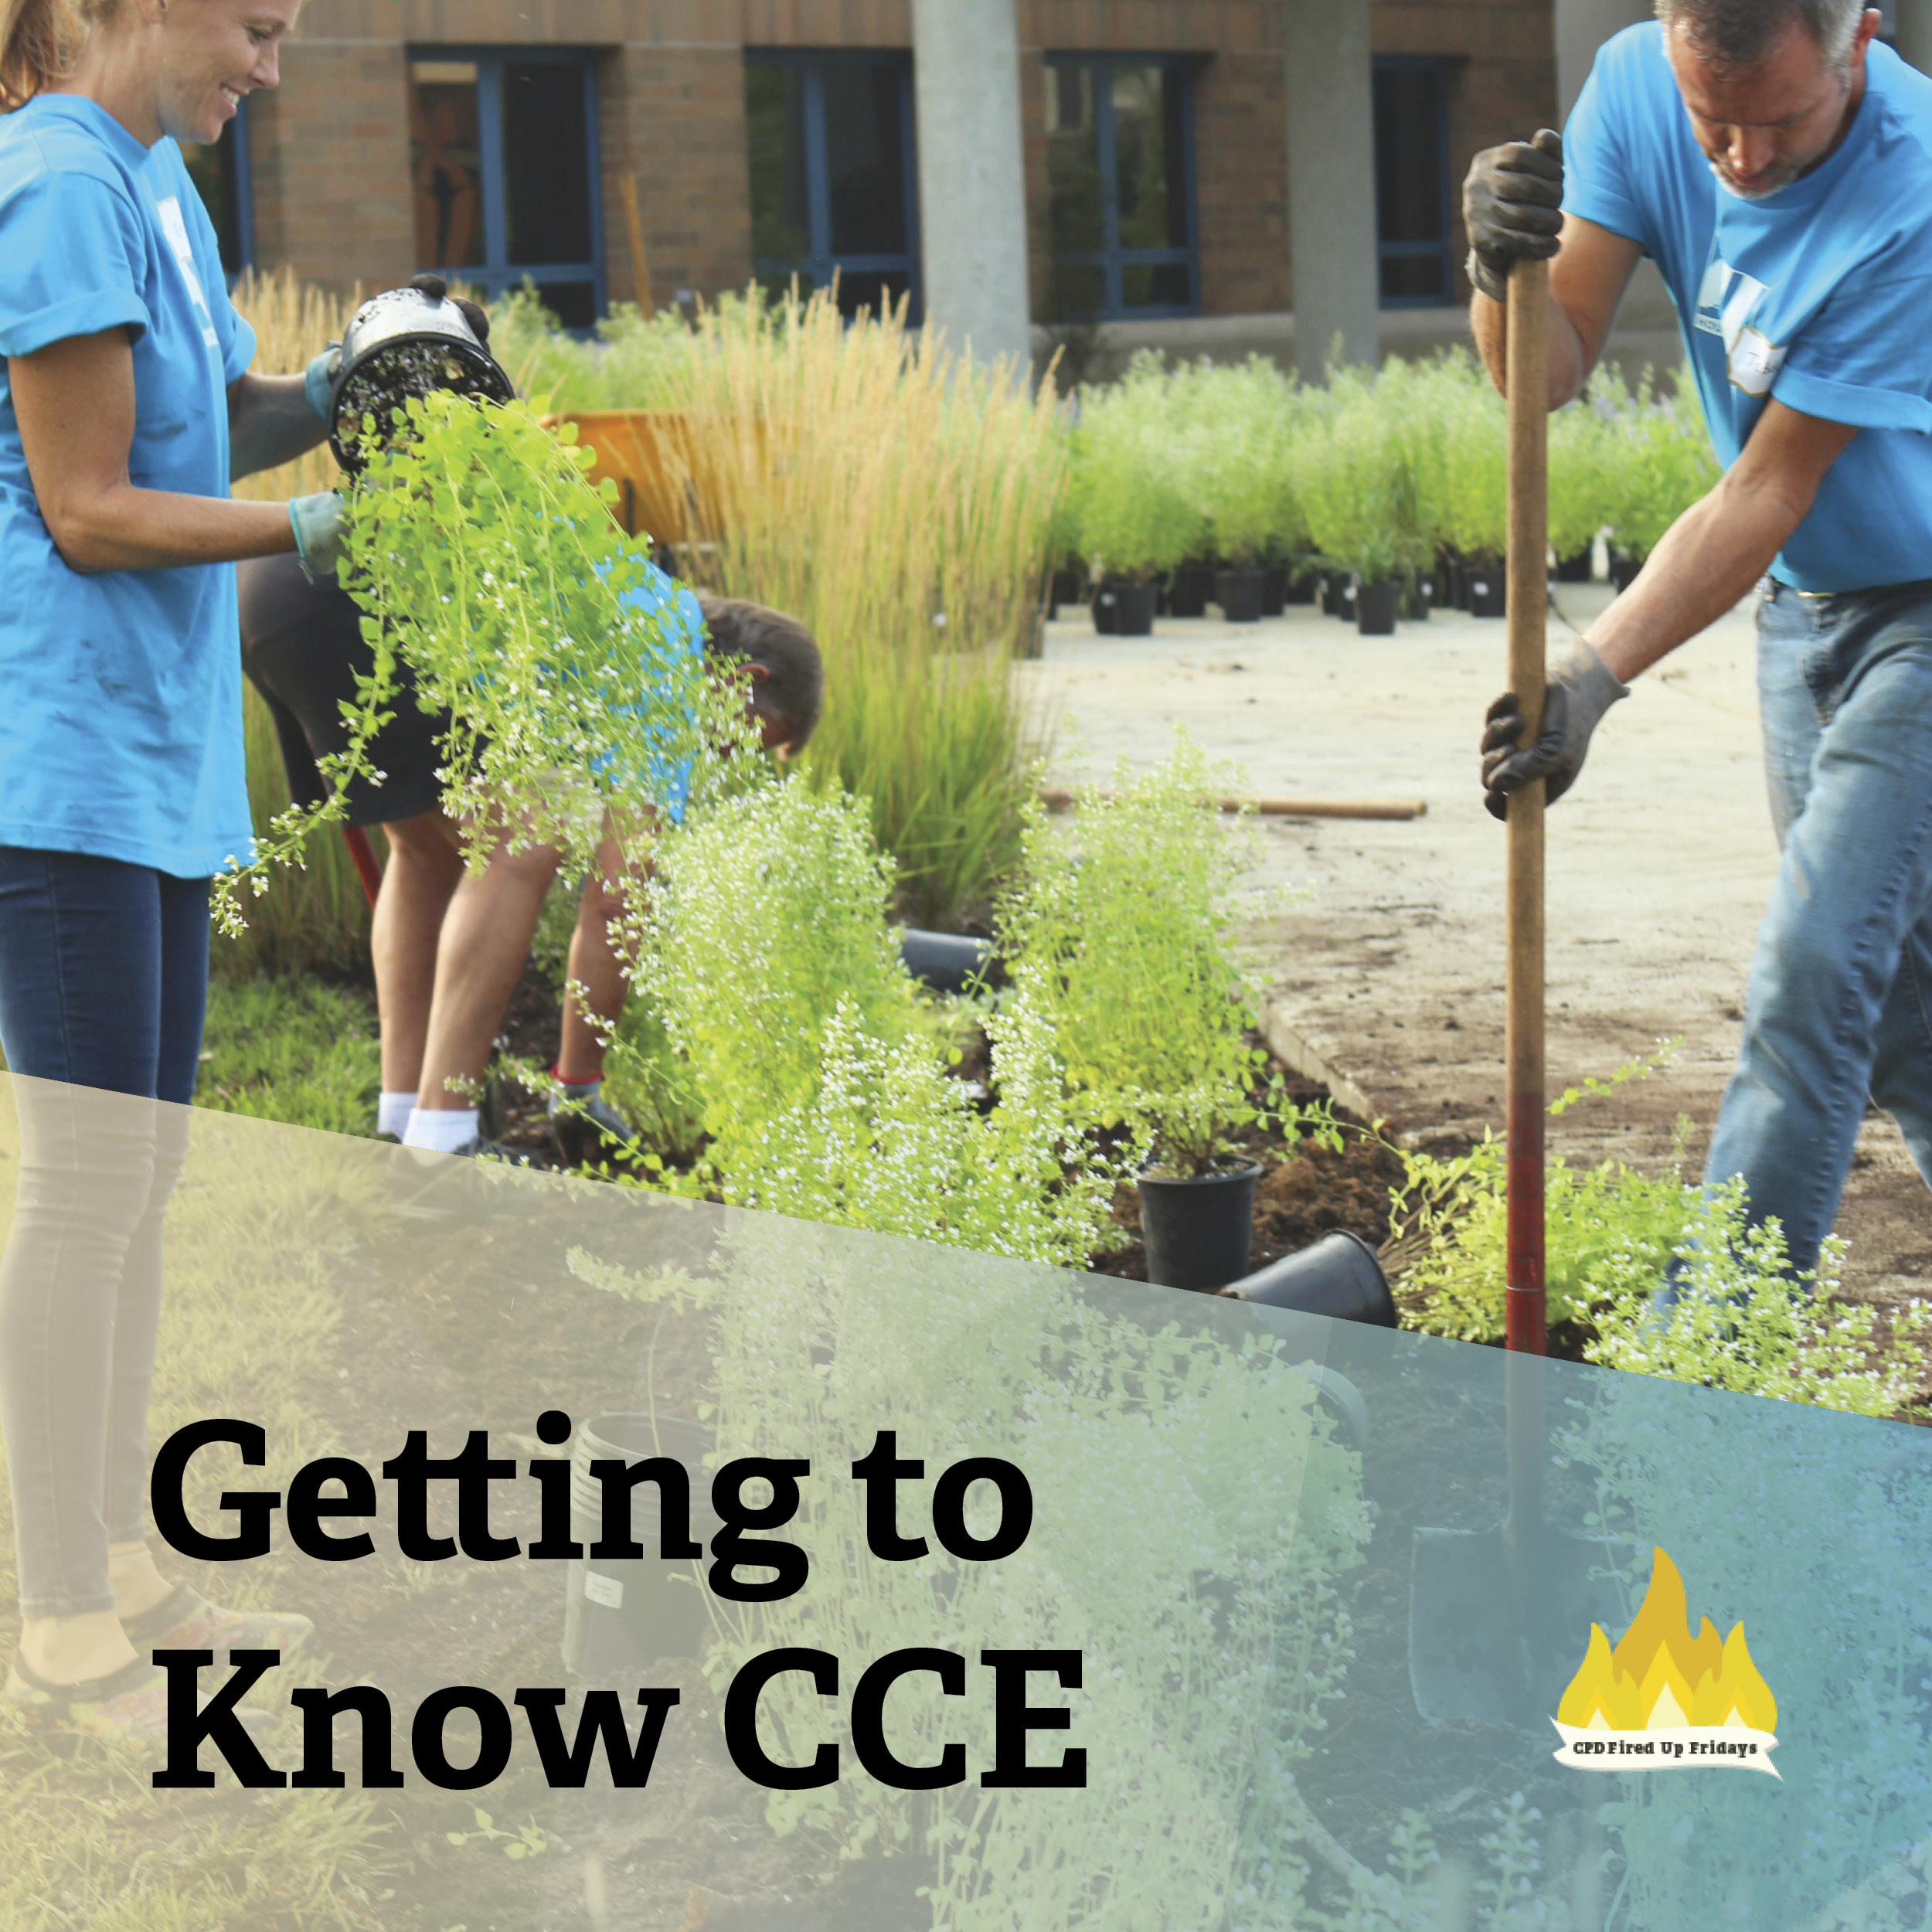 A man with gloves drives a shovel into the dirt of a garden with a woman standing nearby. Not far behind them another person bends over a plant. The text underneath reads: 'Getting to Know CCE'